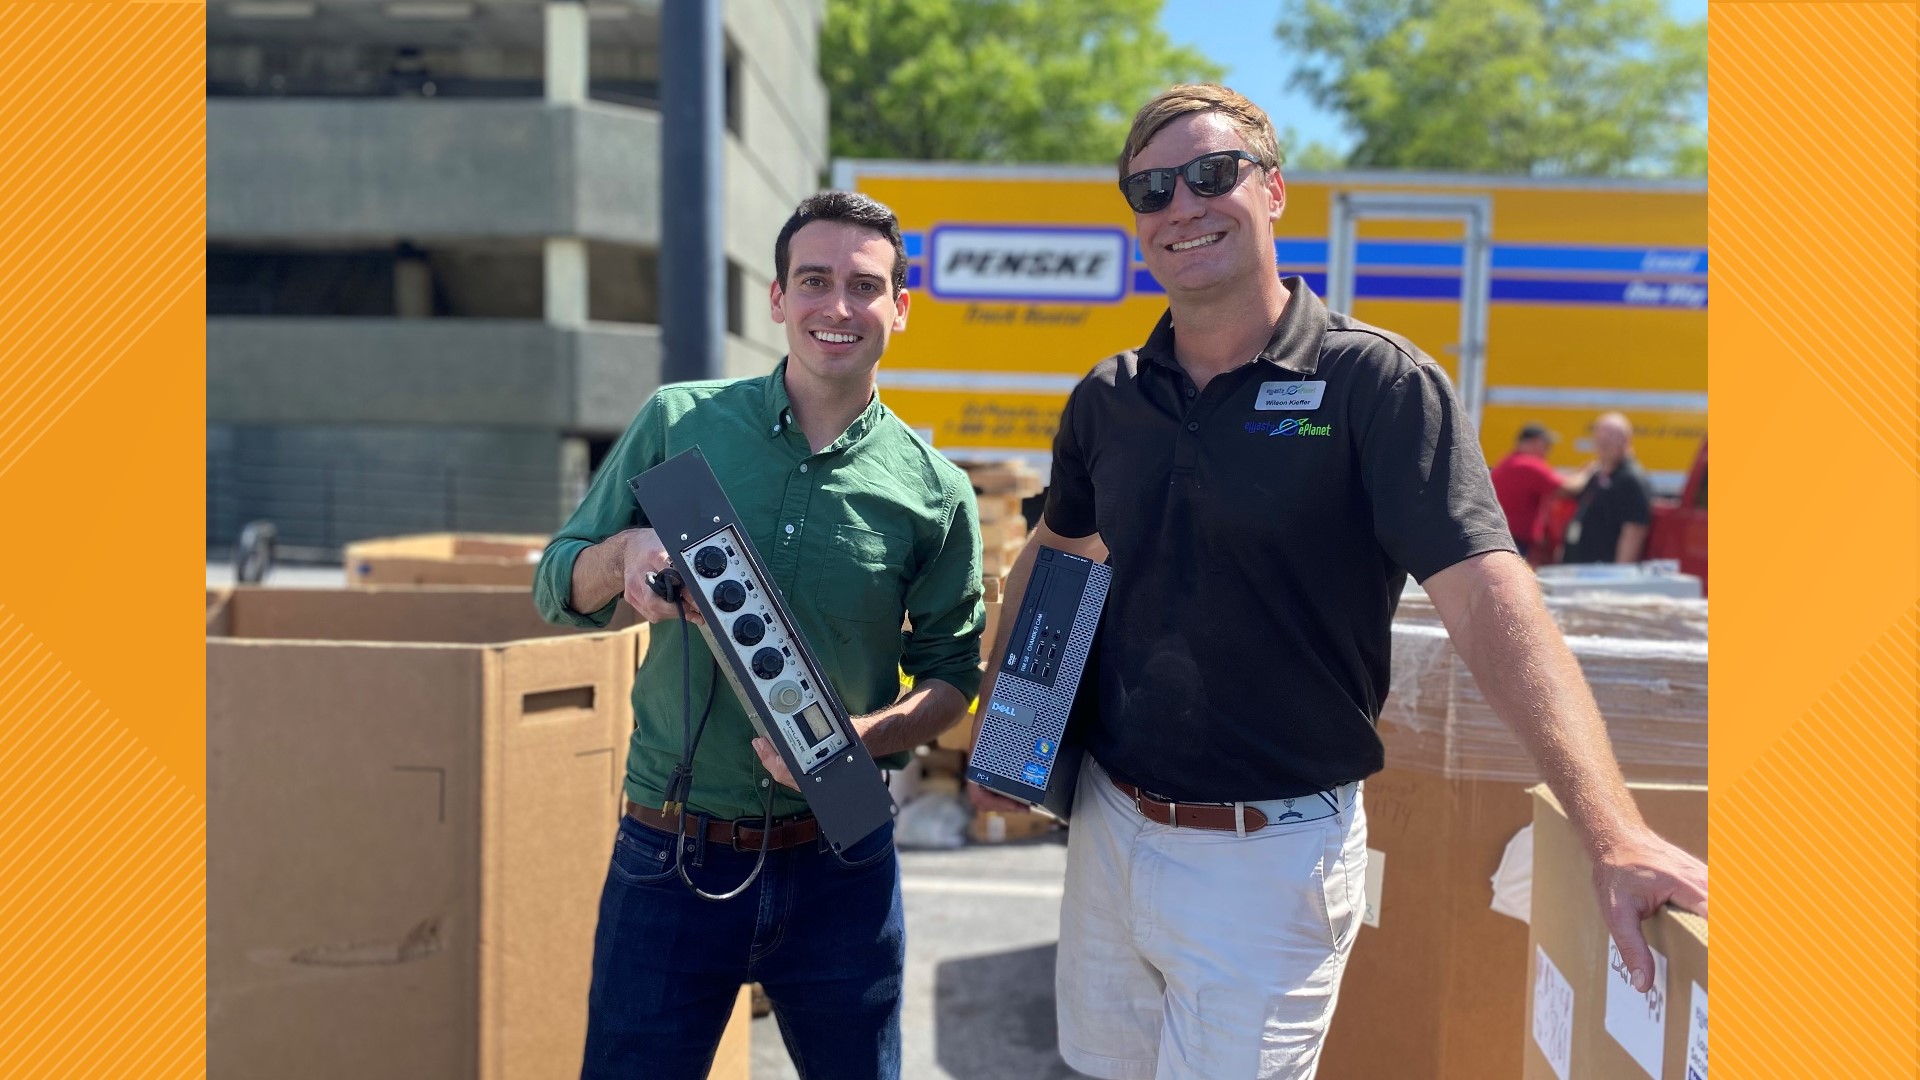 THANK YOU for donating your unused electronics at Lenox Square for our Georgia Natural Gas Earth Day Event with eWaste ePlanet.